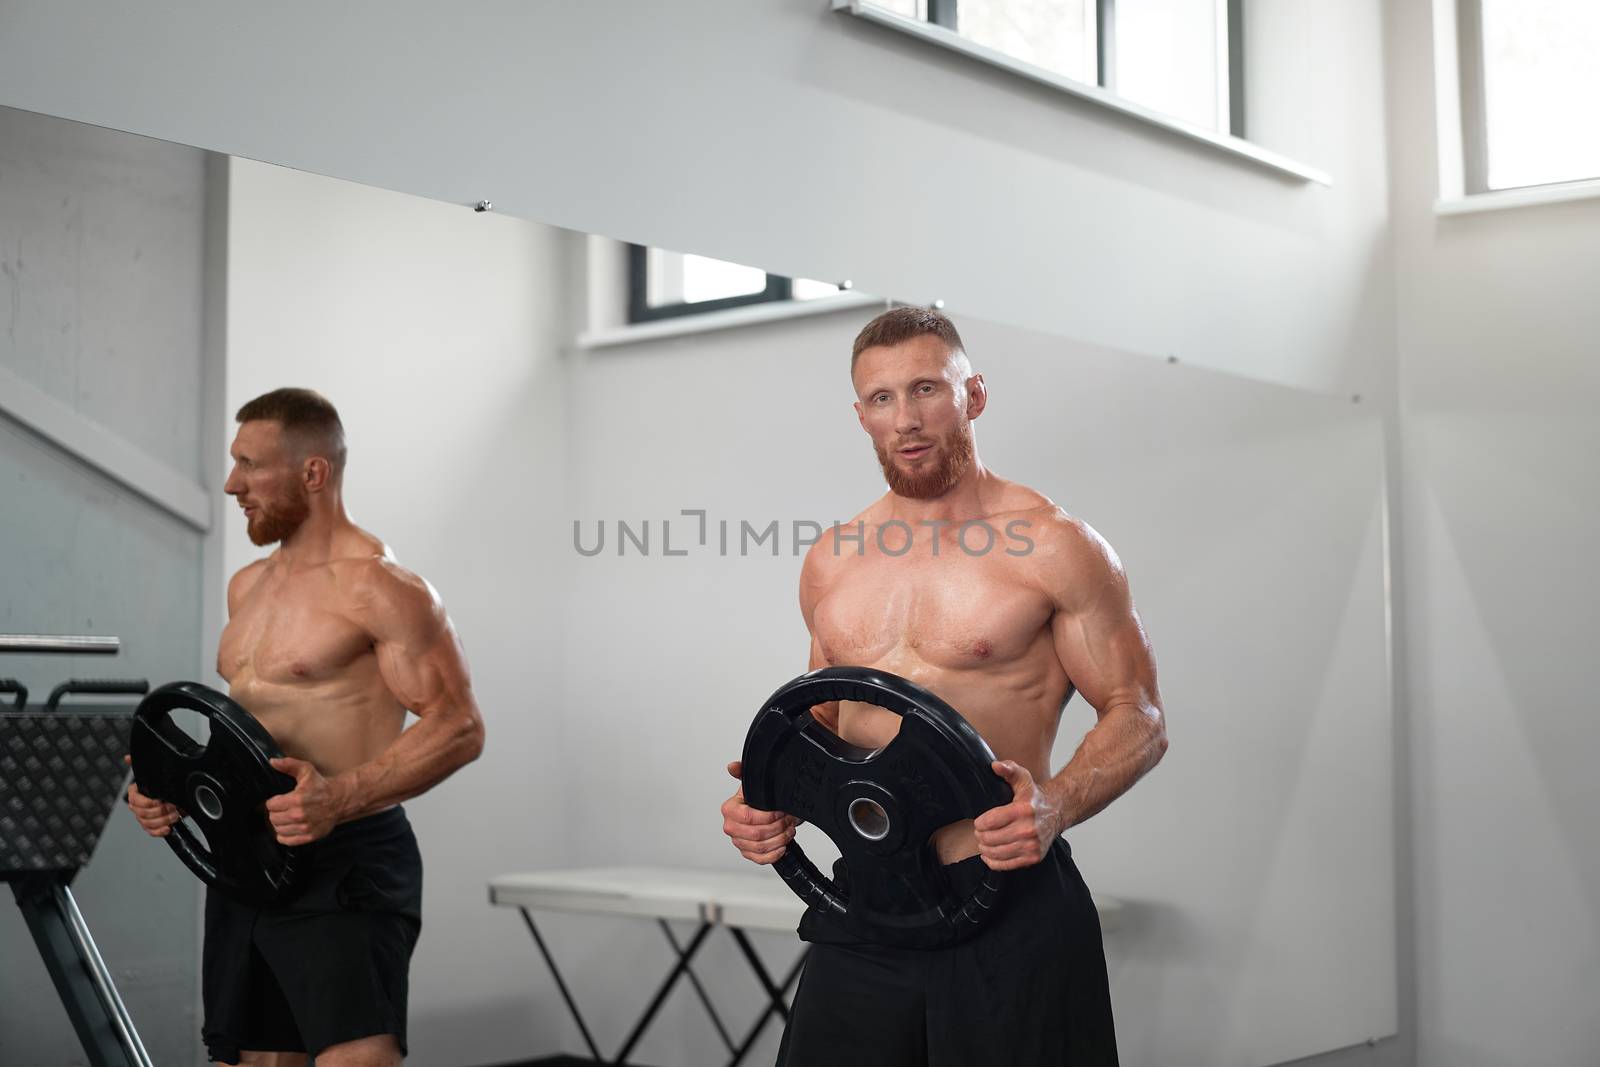 Athlete sportive man gym Middle adult handsome sportsman bodybuilder weightlifter ideal body after training Caucasian trainer standing naked torso With barbell plates in hand mirror background